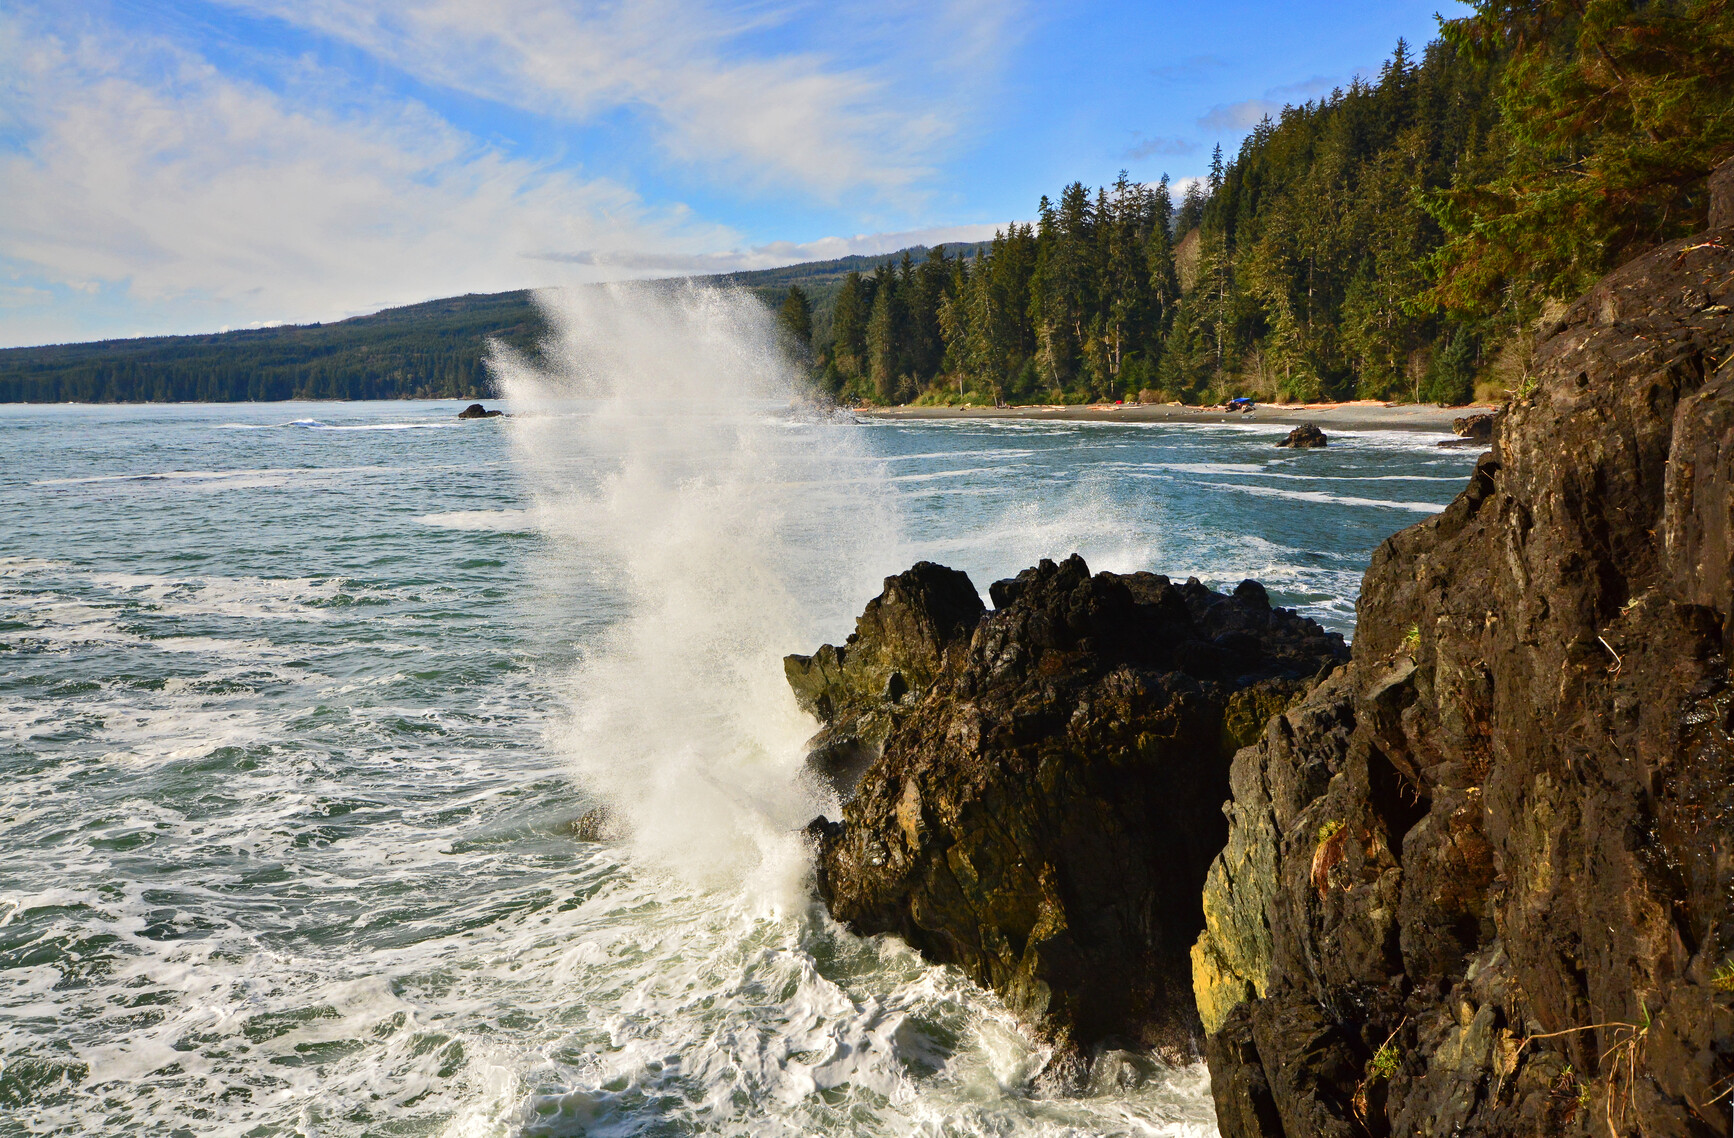 At Sombrio Point in Juan De Fuca Park, waves crash into a rocky outcrop. Along the shoreline, forest covered mountains are in view.